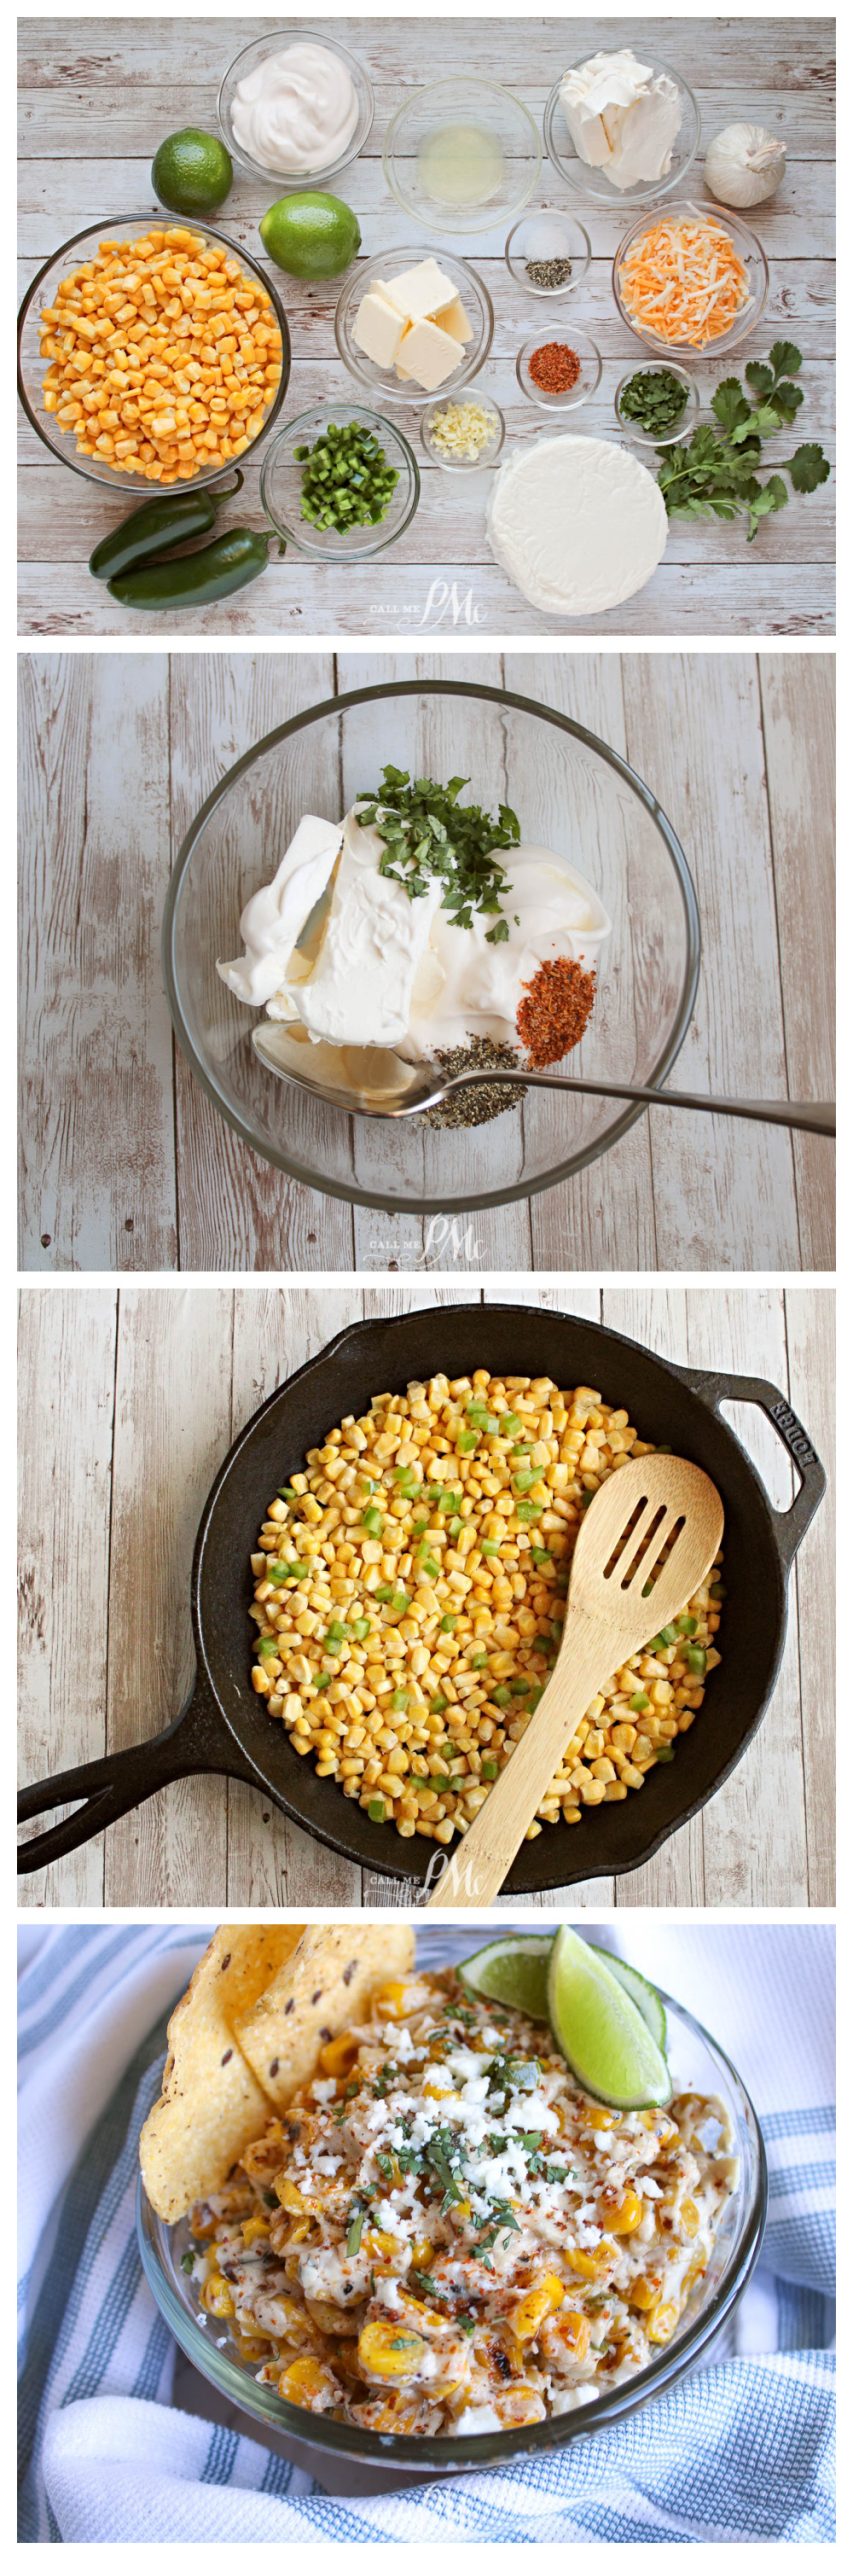 Spicy Charred Street Corn {Elote} Dip is the best dip to serve during the Summer months and with Mexican-inspired foods.